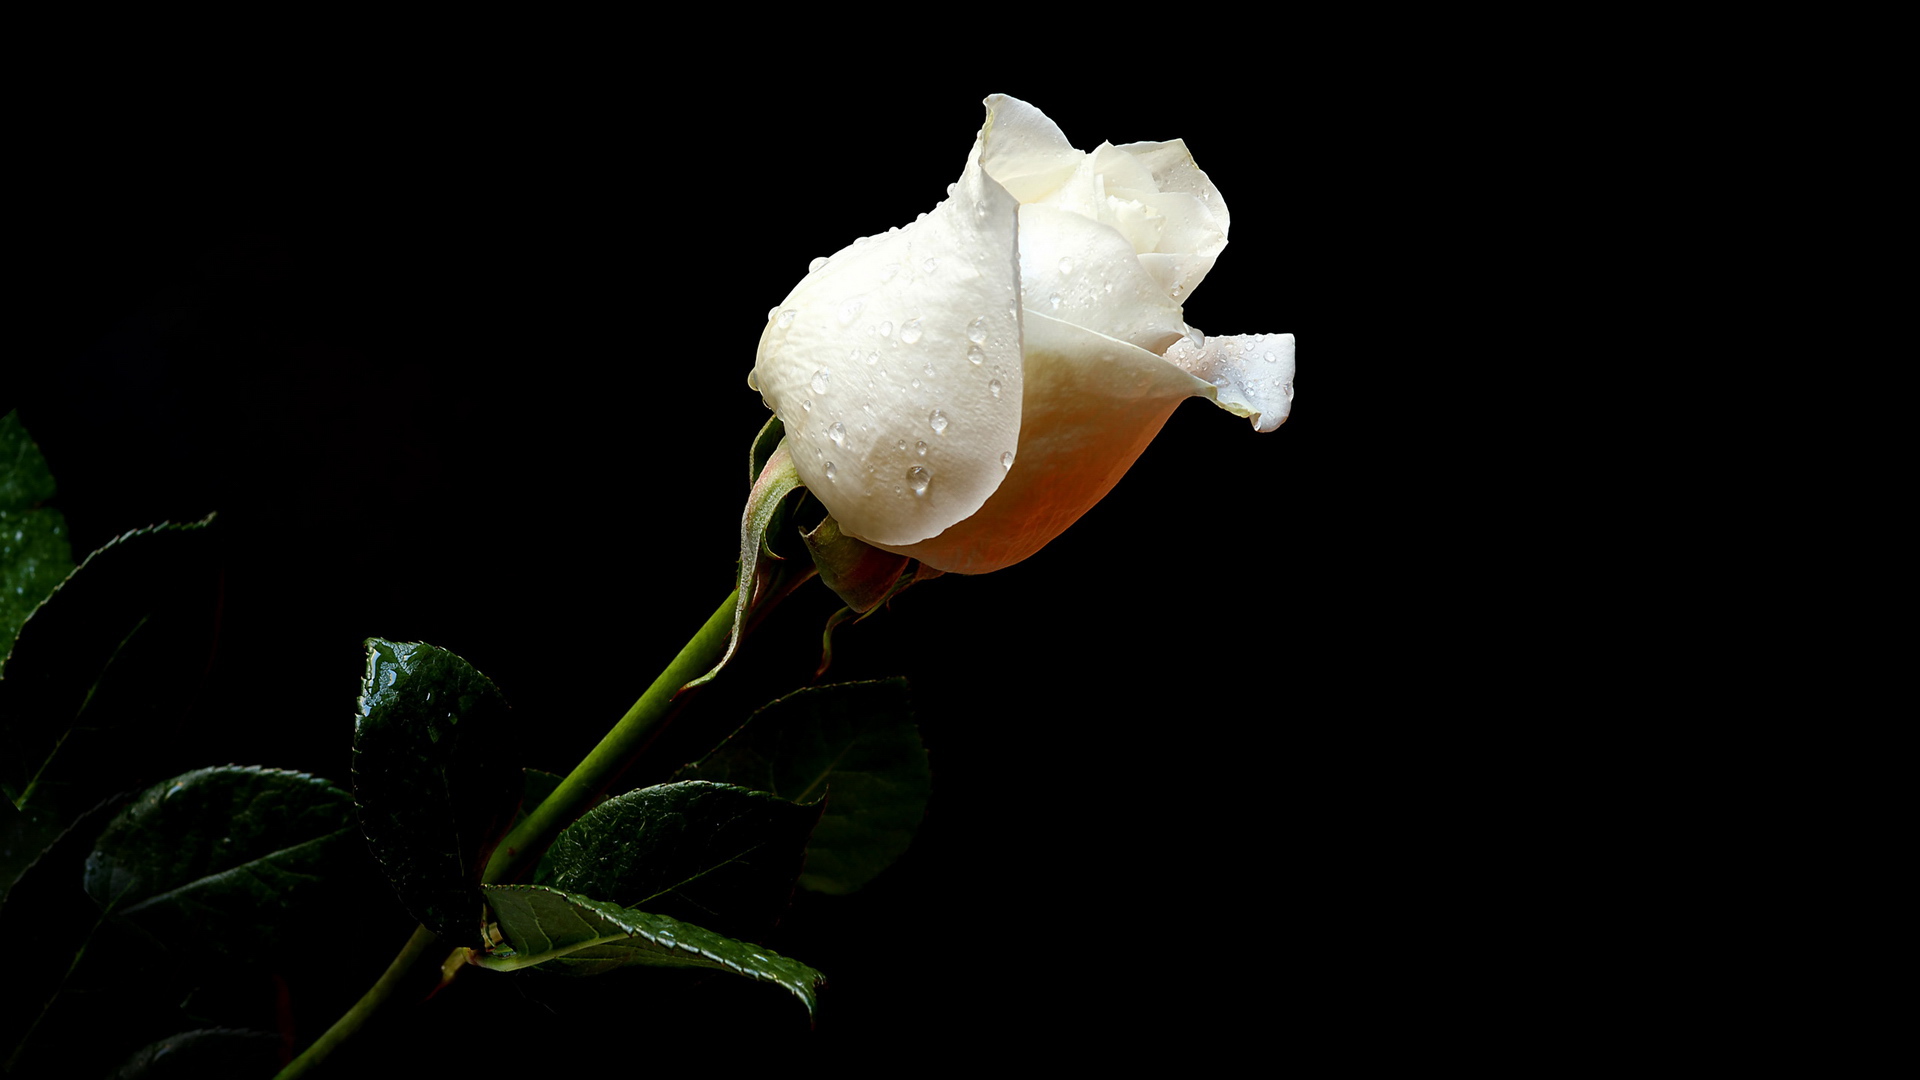 Wet White Rose On A Black Background Wallpaper And Image